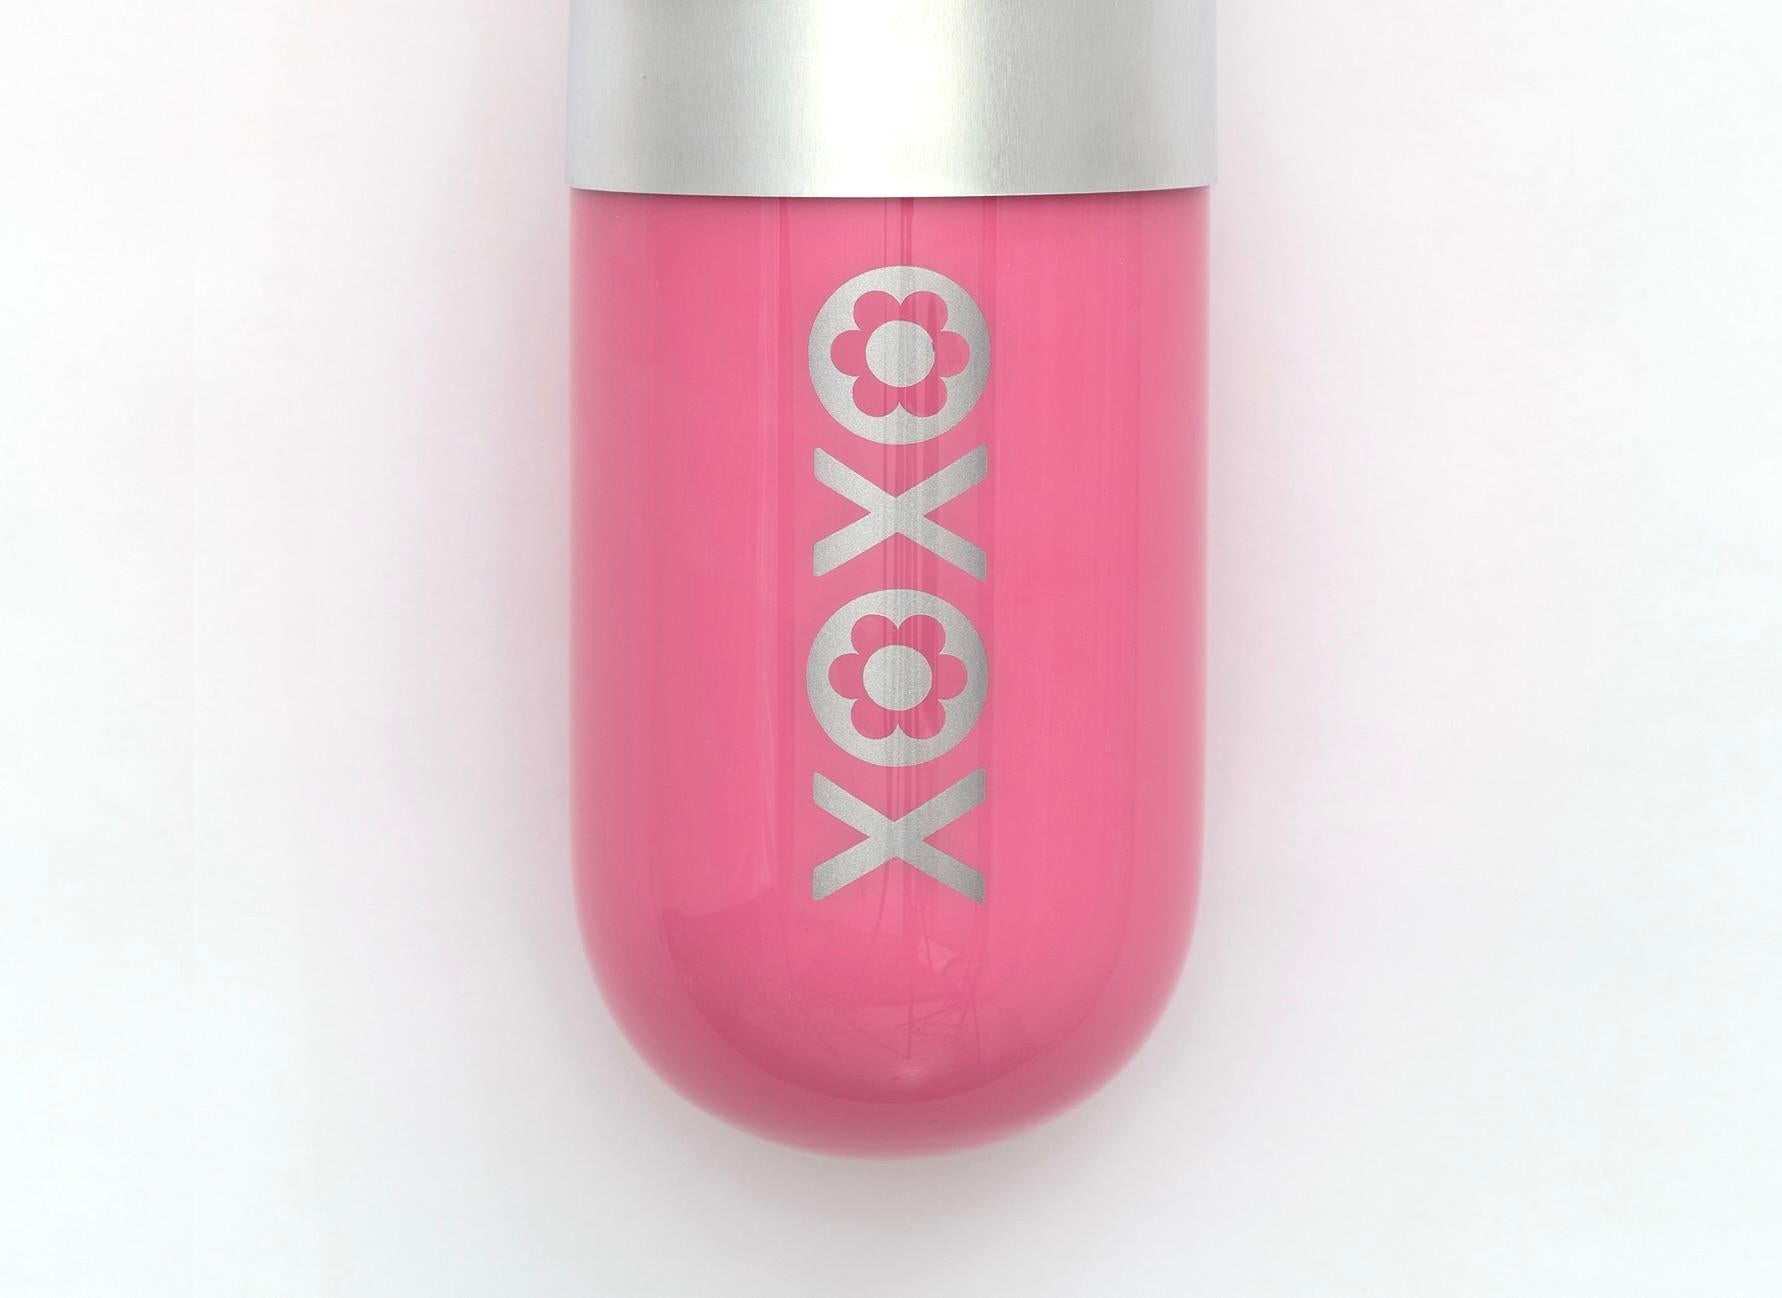 American XOXO (Hugs & Kisses) - Pink glass pill wall sculpture For Sale